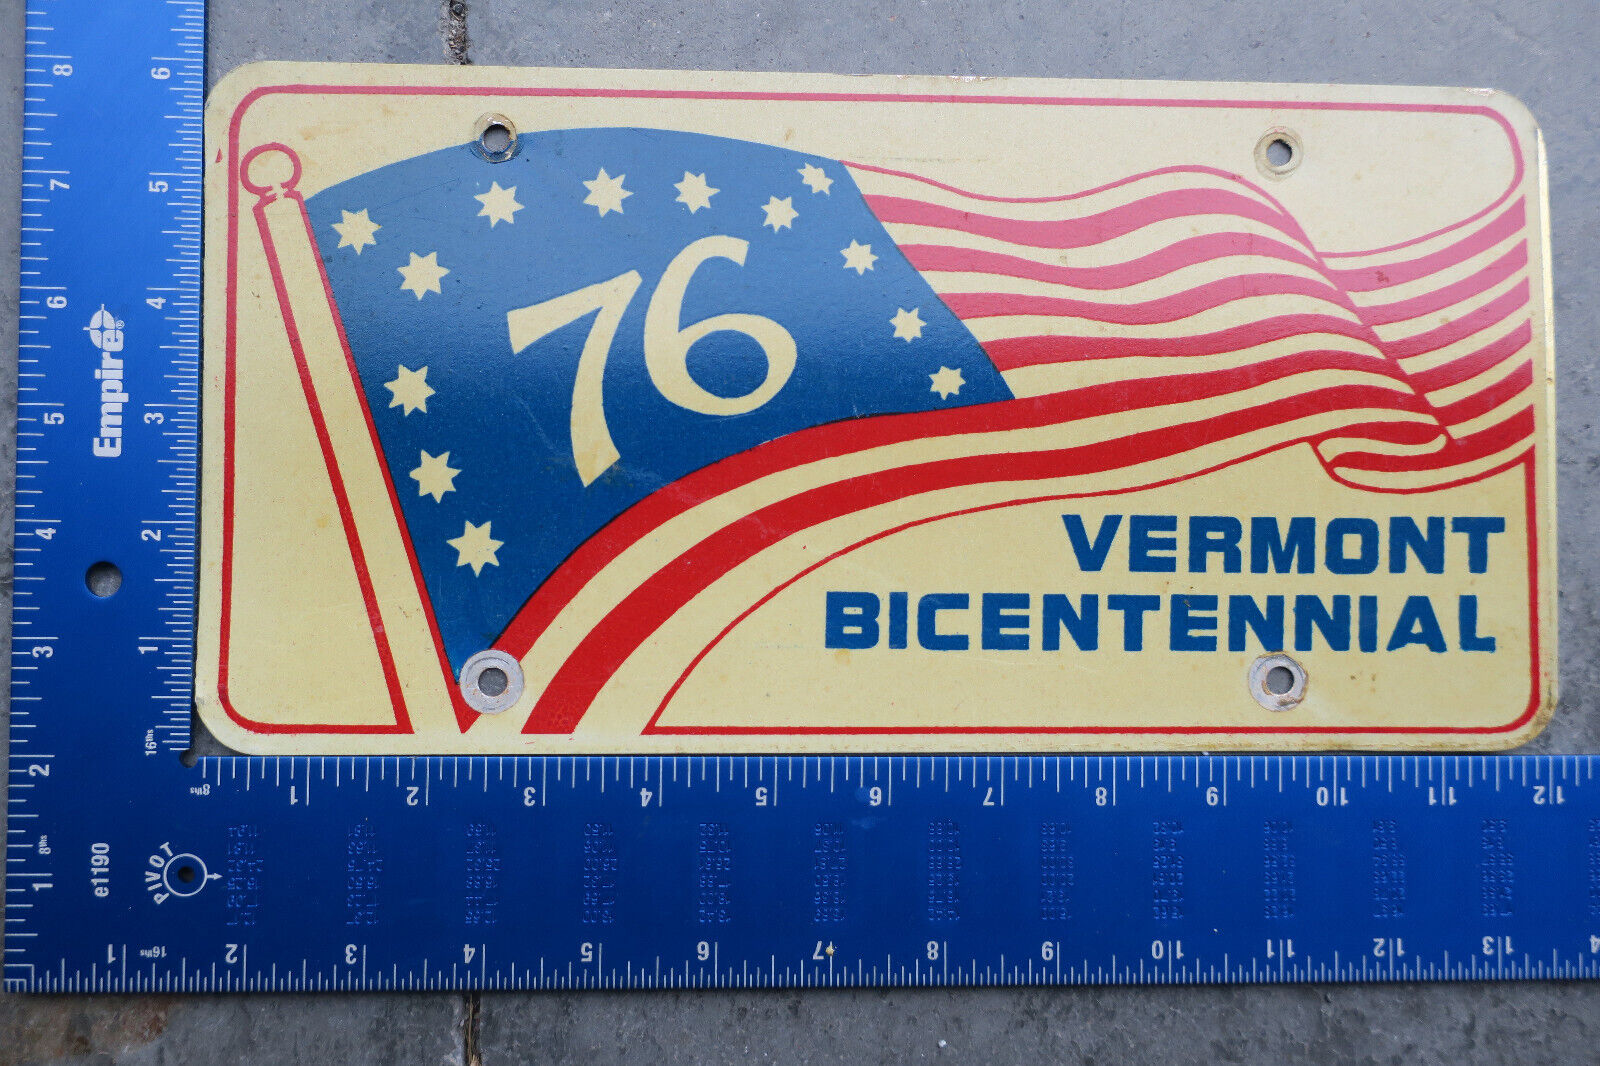 1976 76 VERMONT VT BICENTENNIAL BOOSTER LICENSE PLATE AMERICAN FLAG NICE ONE #50